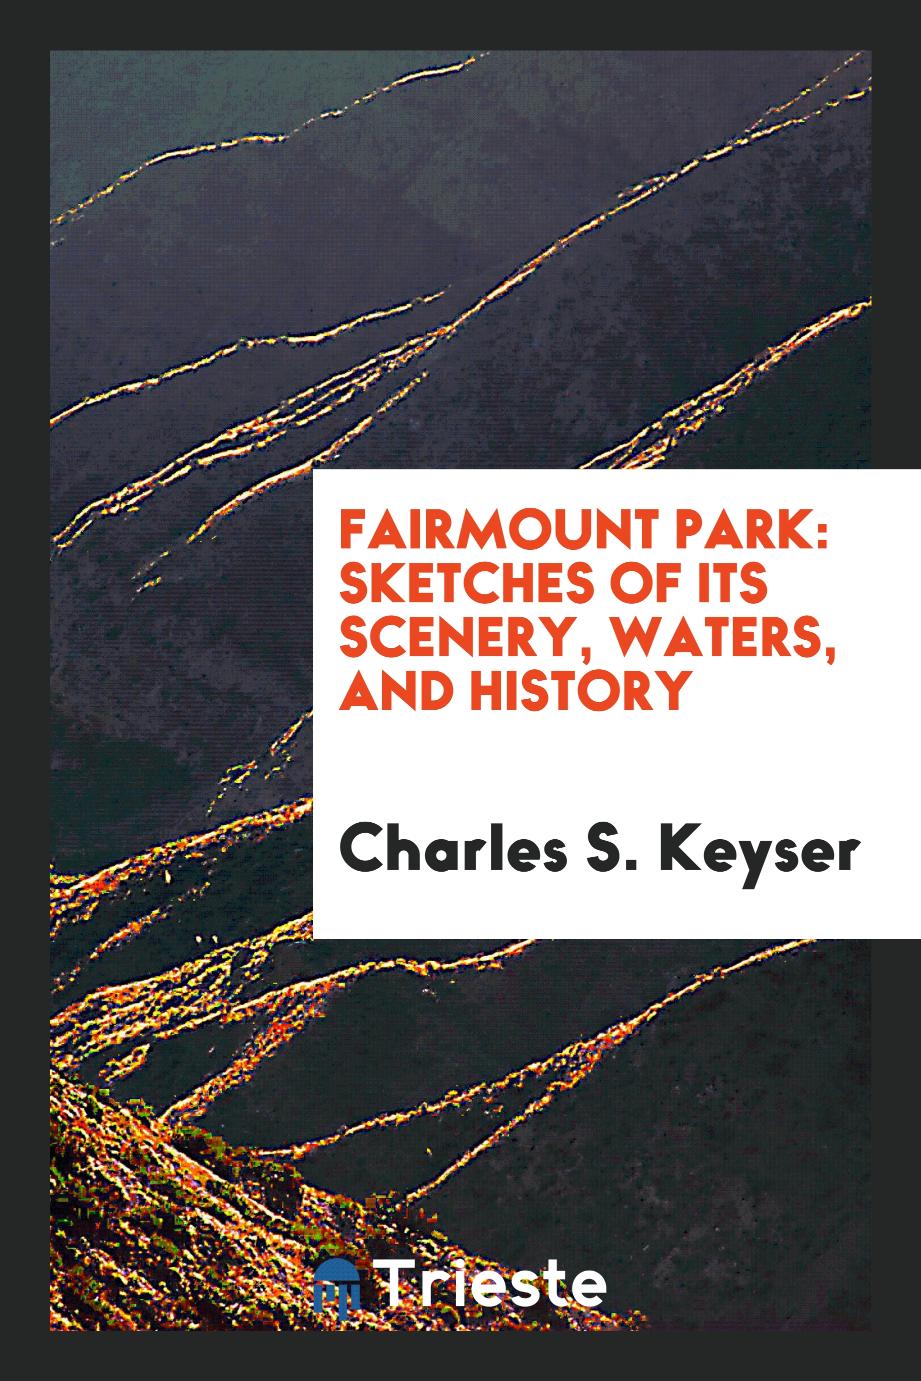 Fairmount Park: Sketches of Its Scenery, Waters, and History